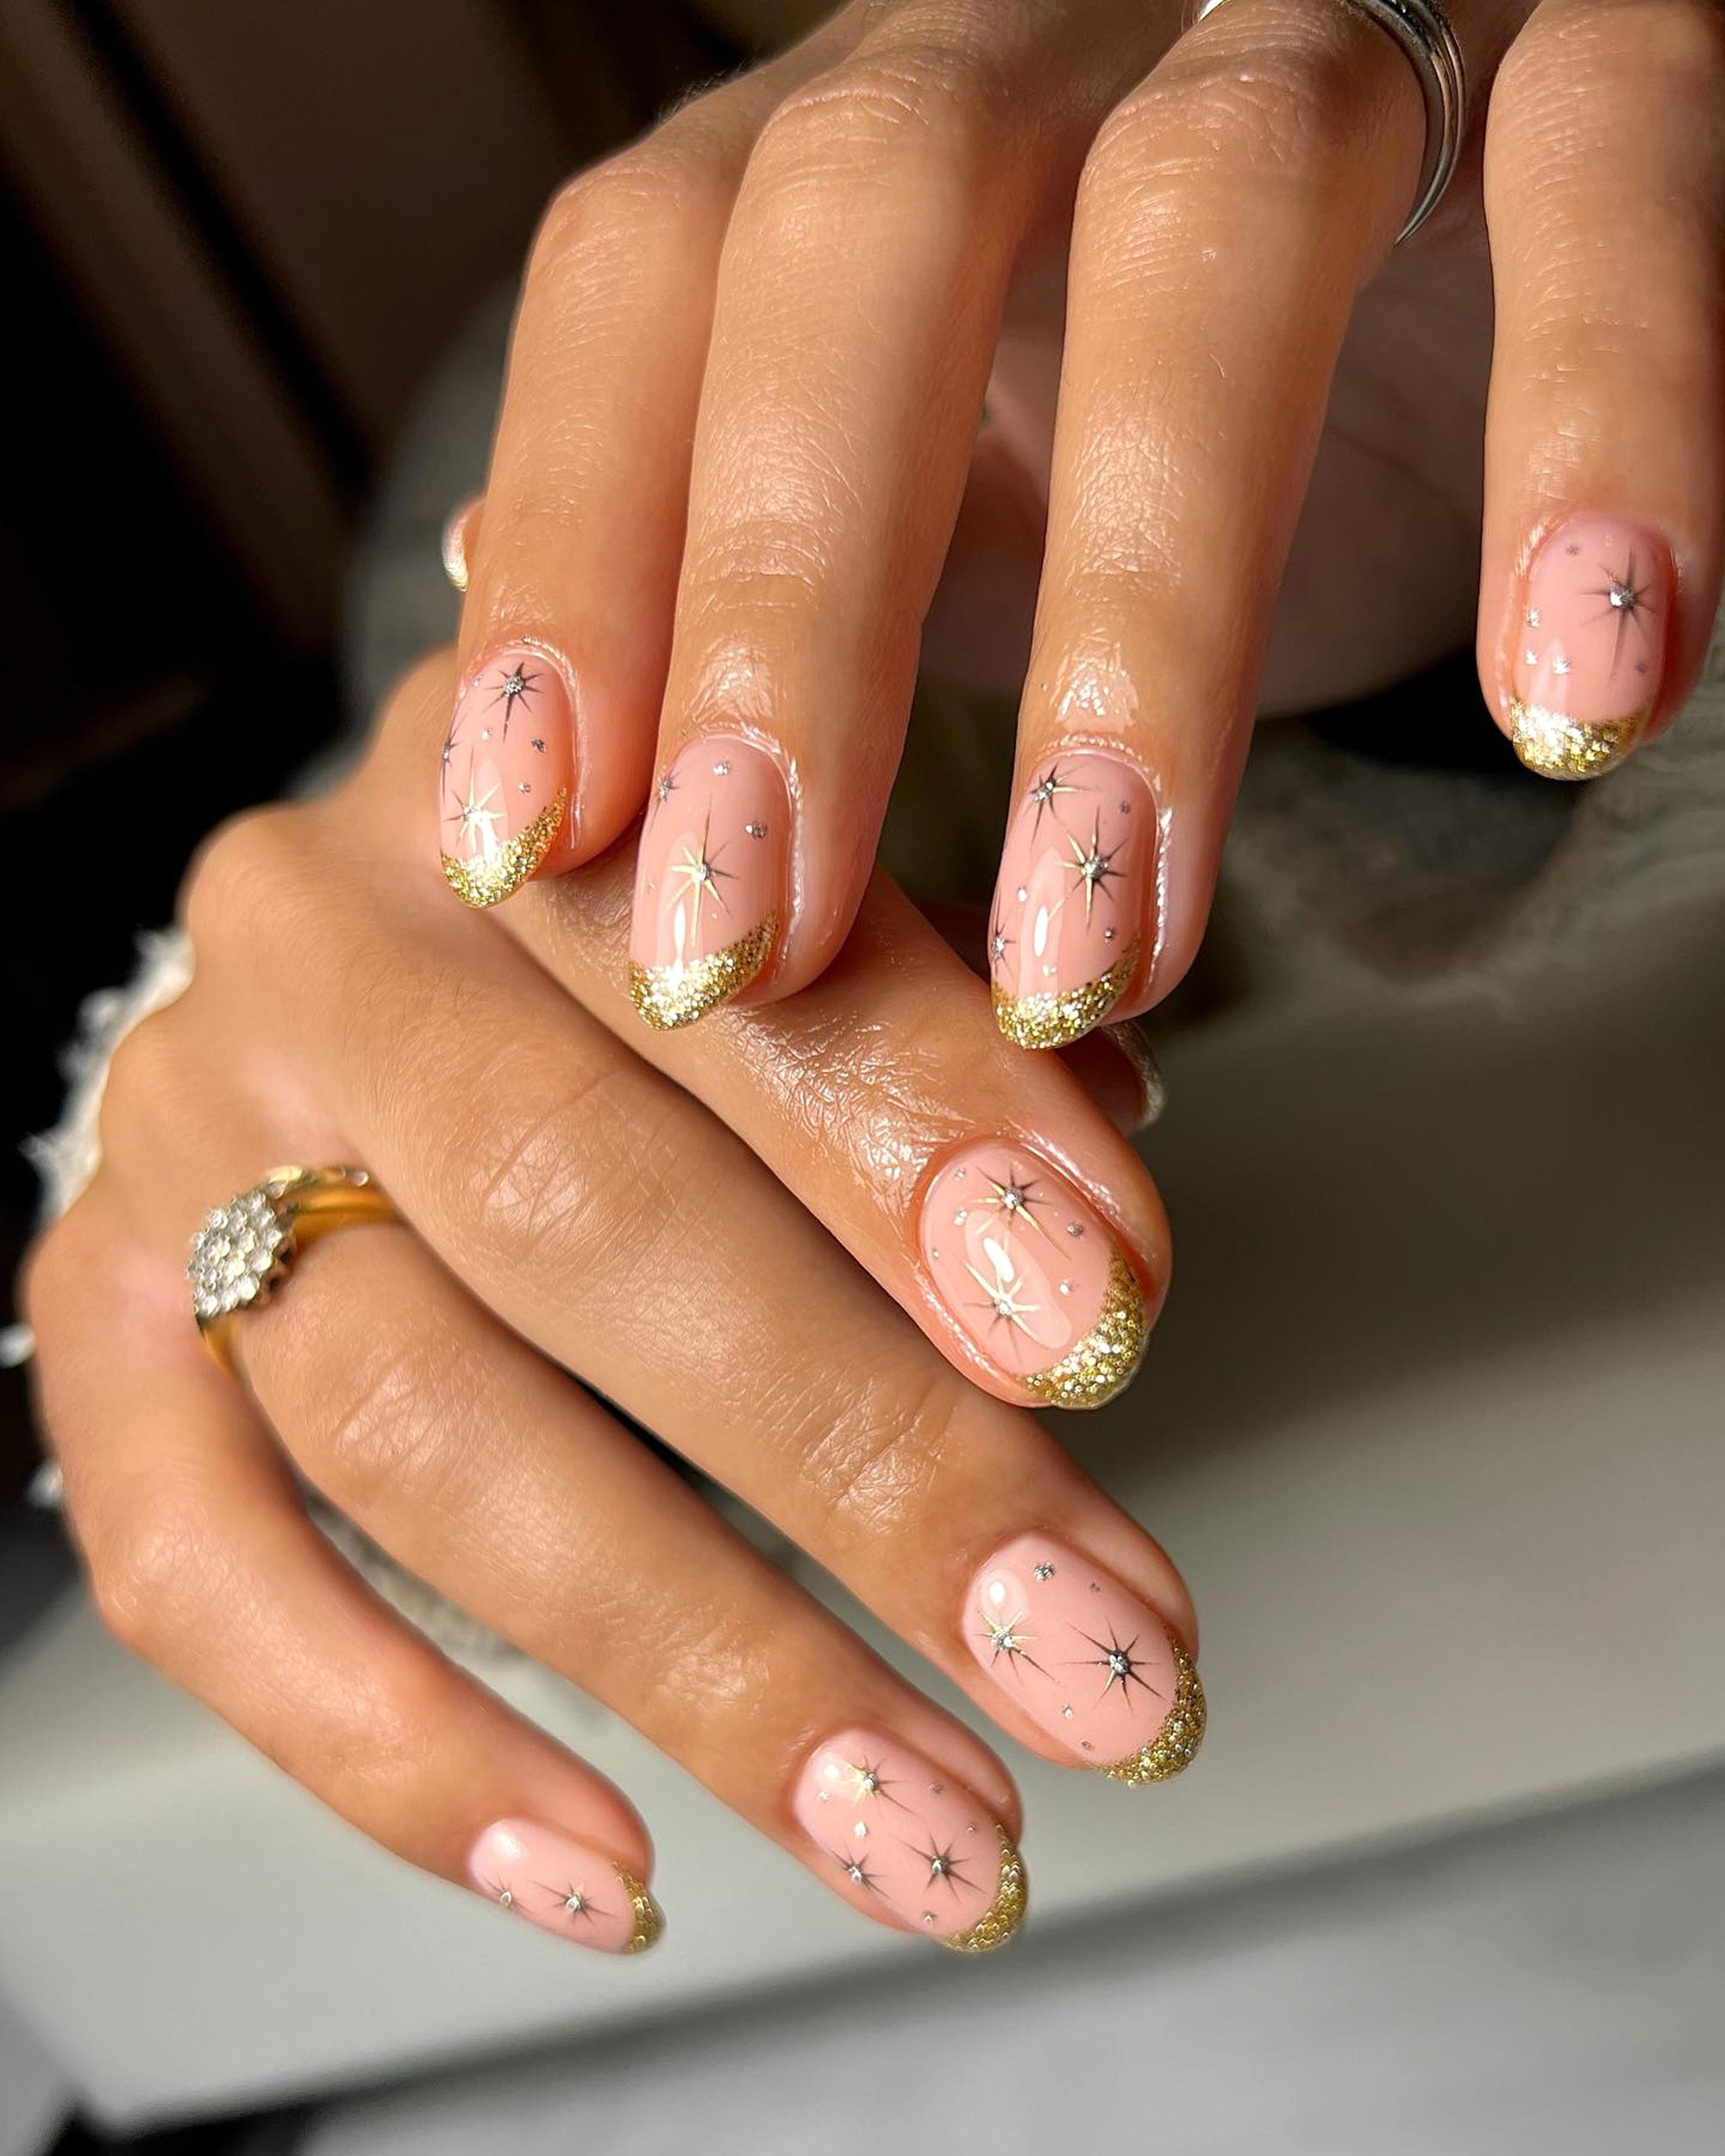 TOP 5] Acrylic nails near you in Macosquin - Find the best acrylic nails  place for you!